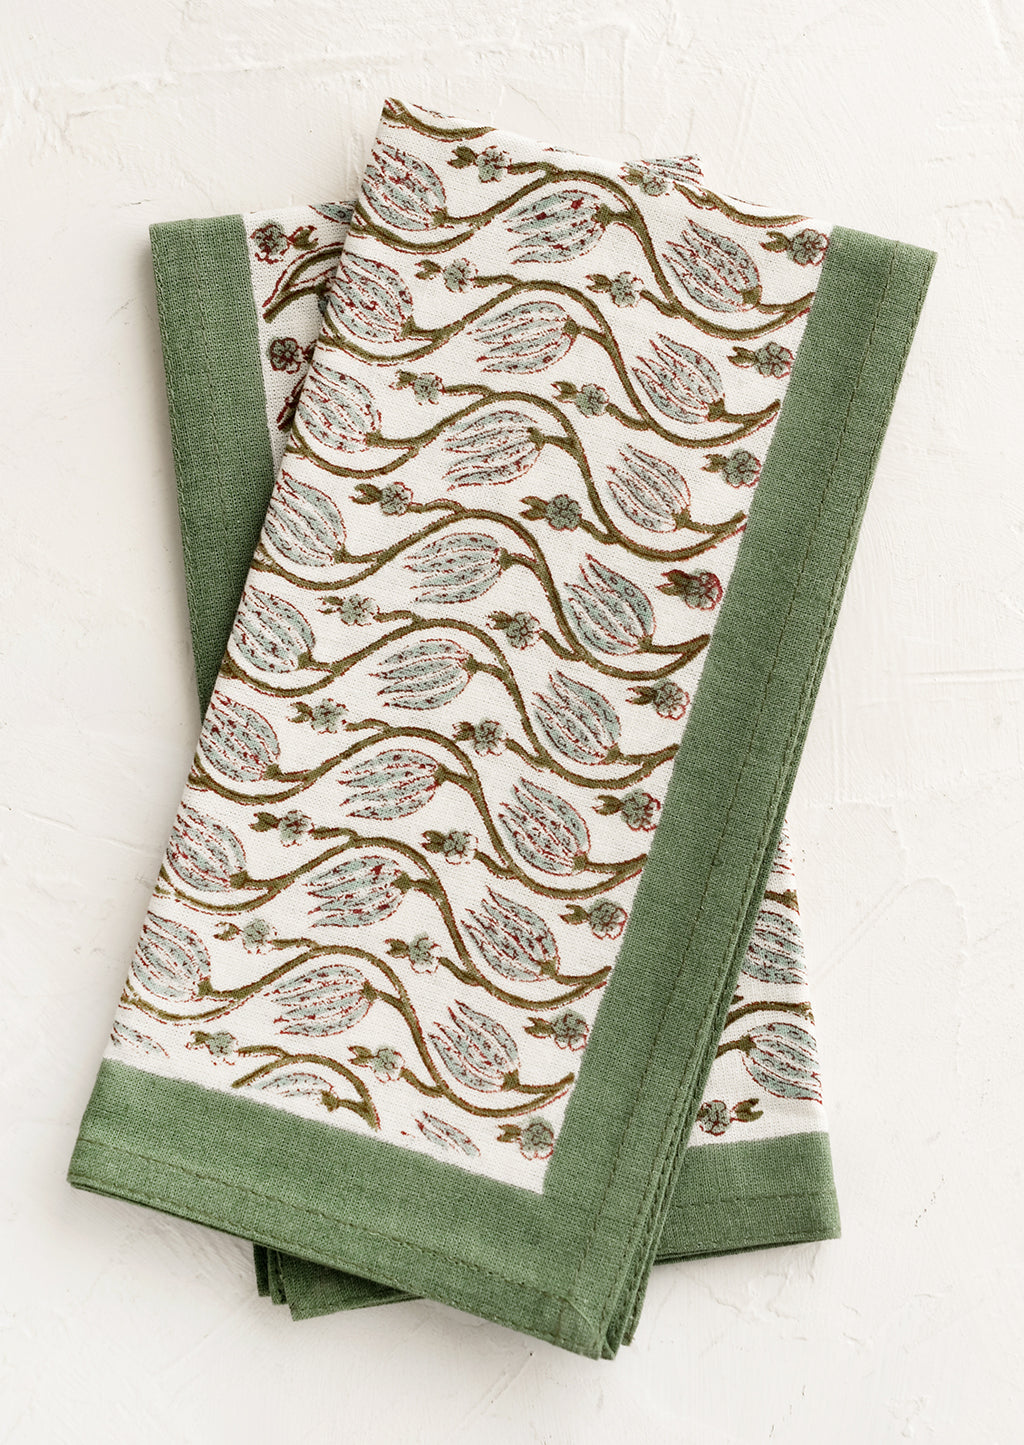 Ivy Multi: Floral print napkins with ivy green border.